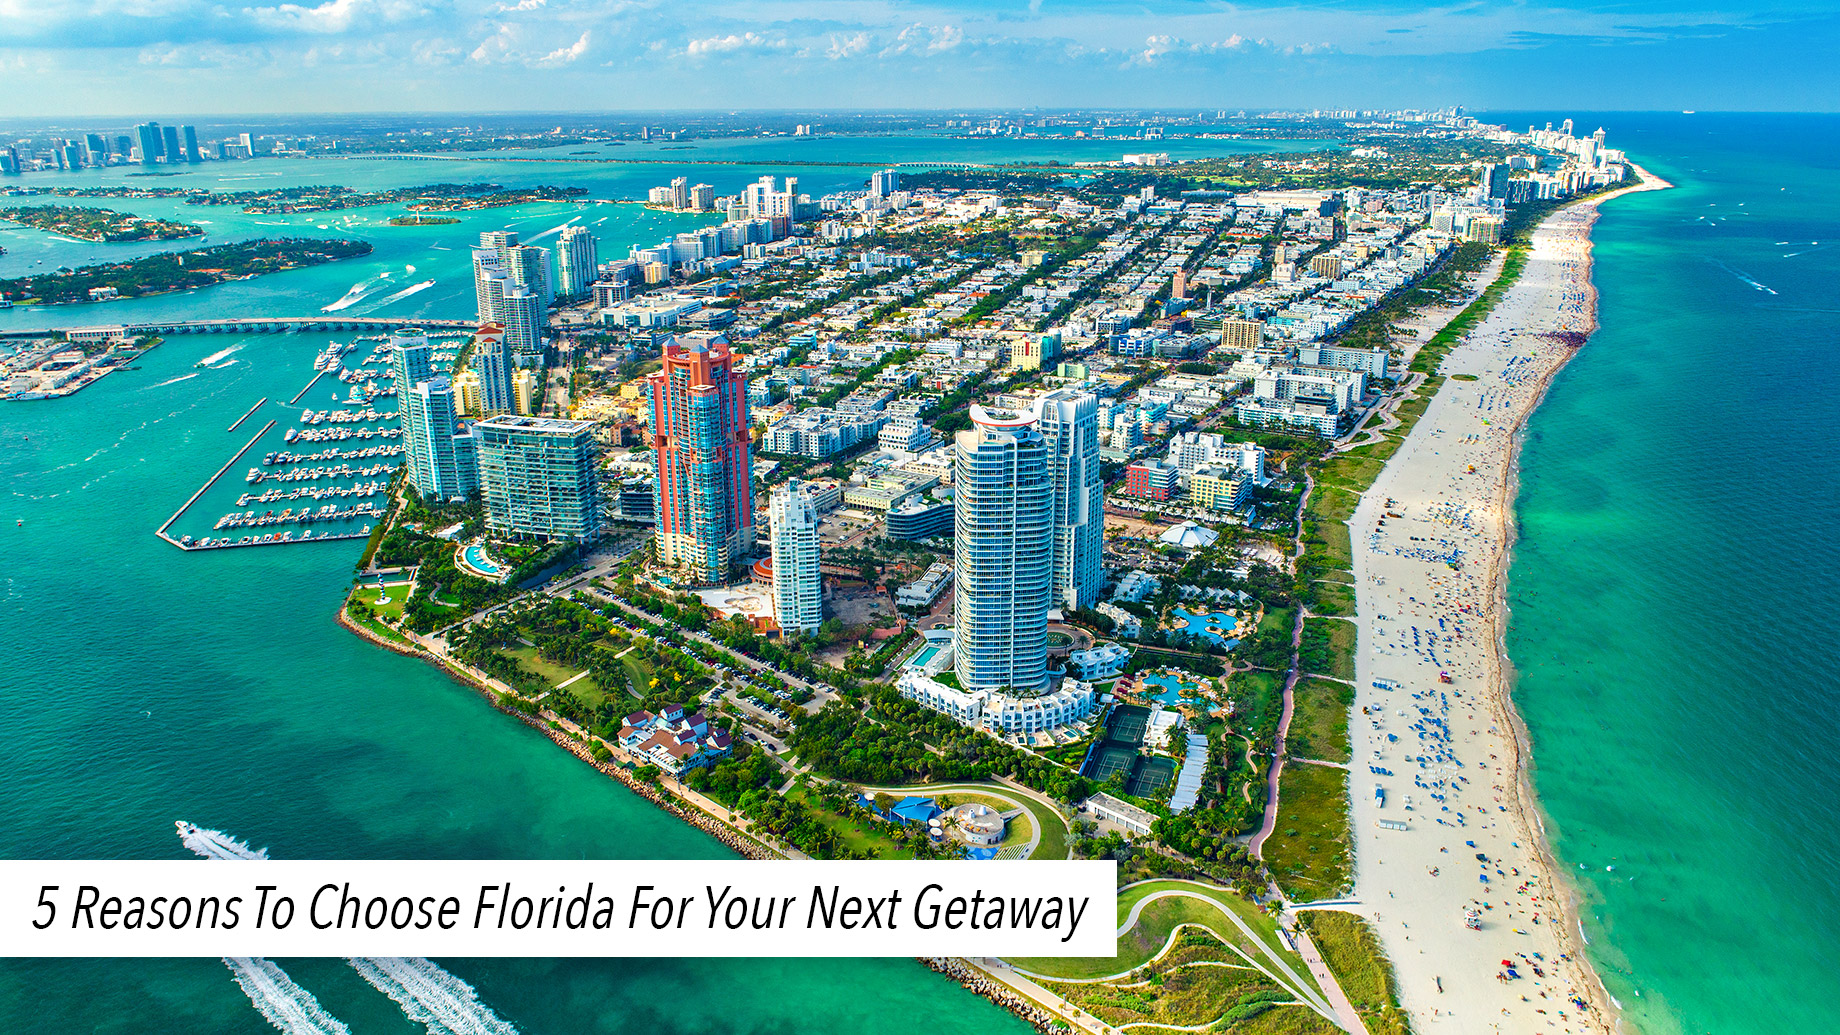 5 Reasons To Choose Florida For Your Next Getaway